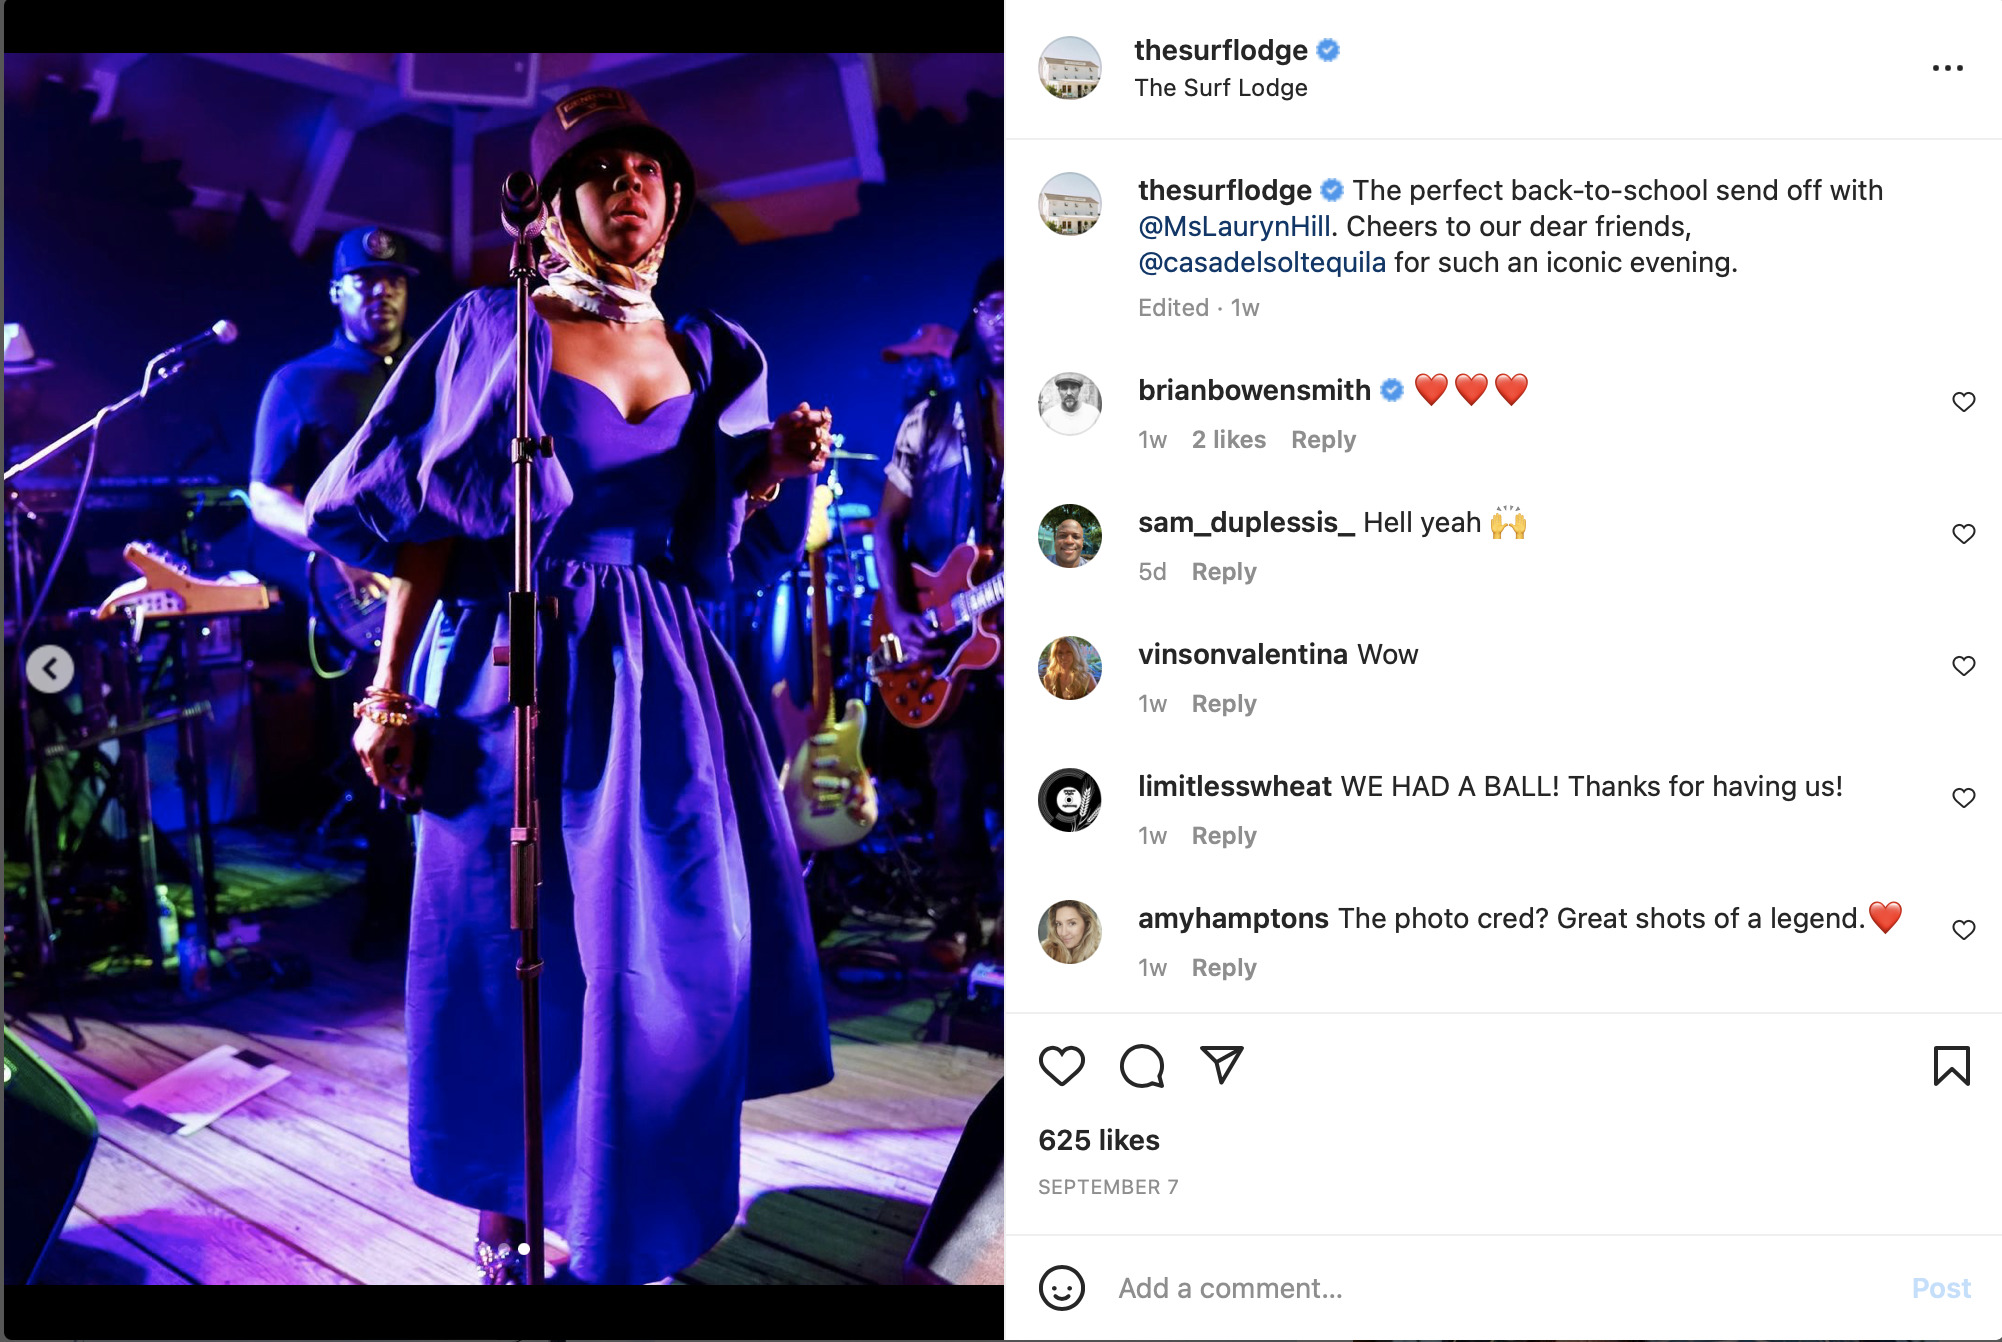 The recent Lauryn Hill concert was promoted on the Surf Lodge's social media.